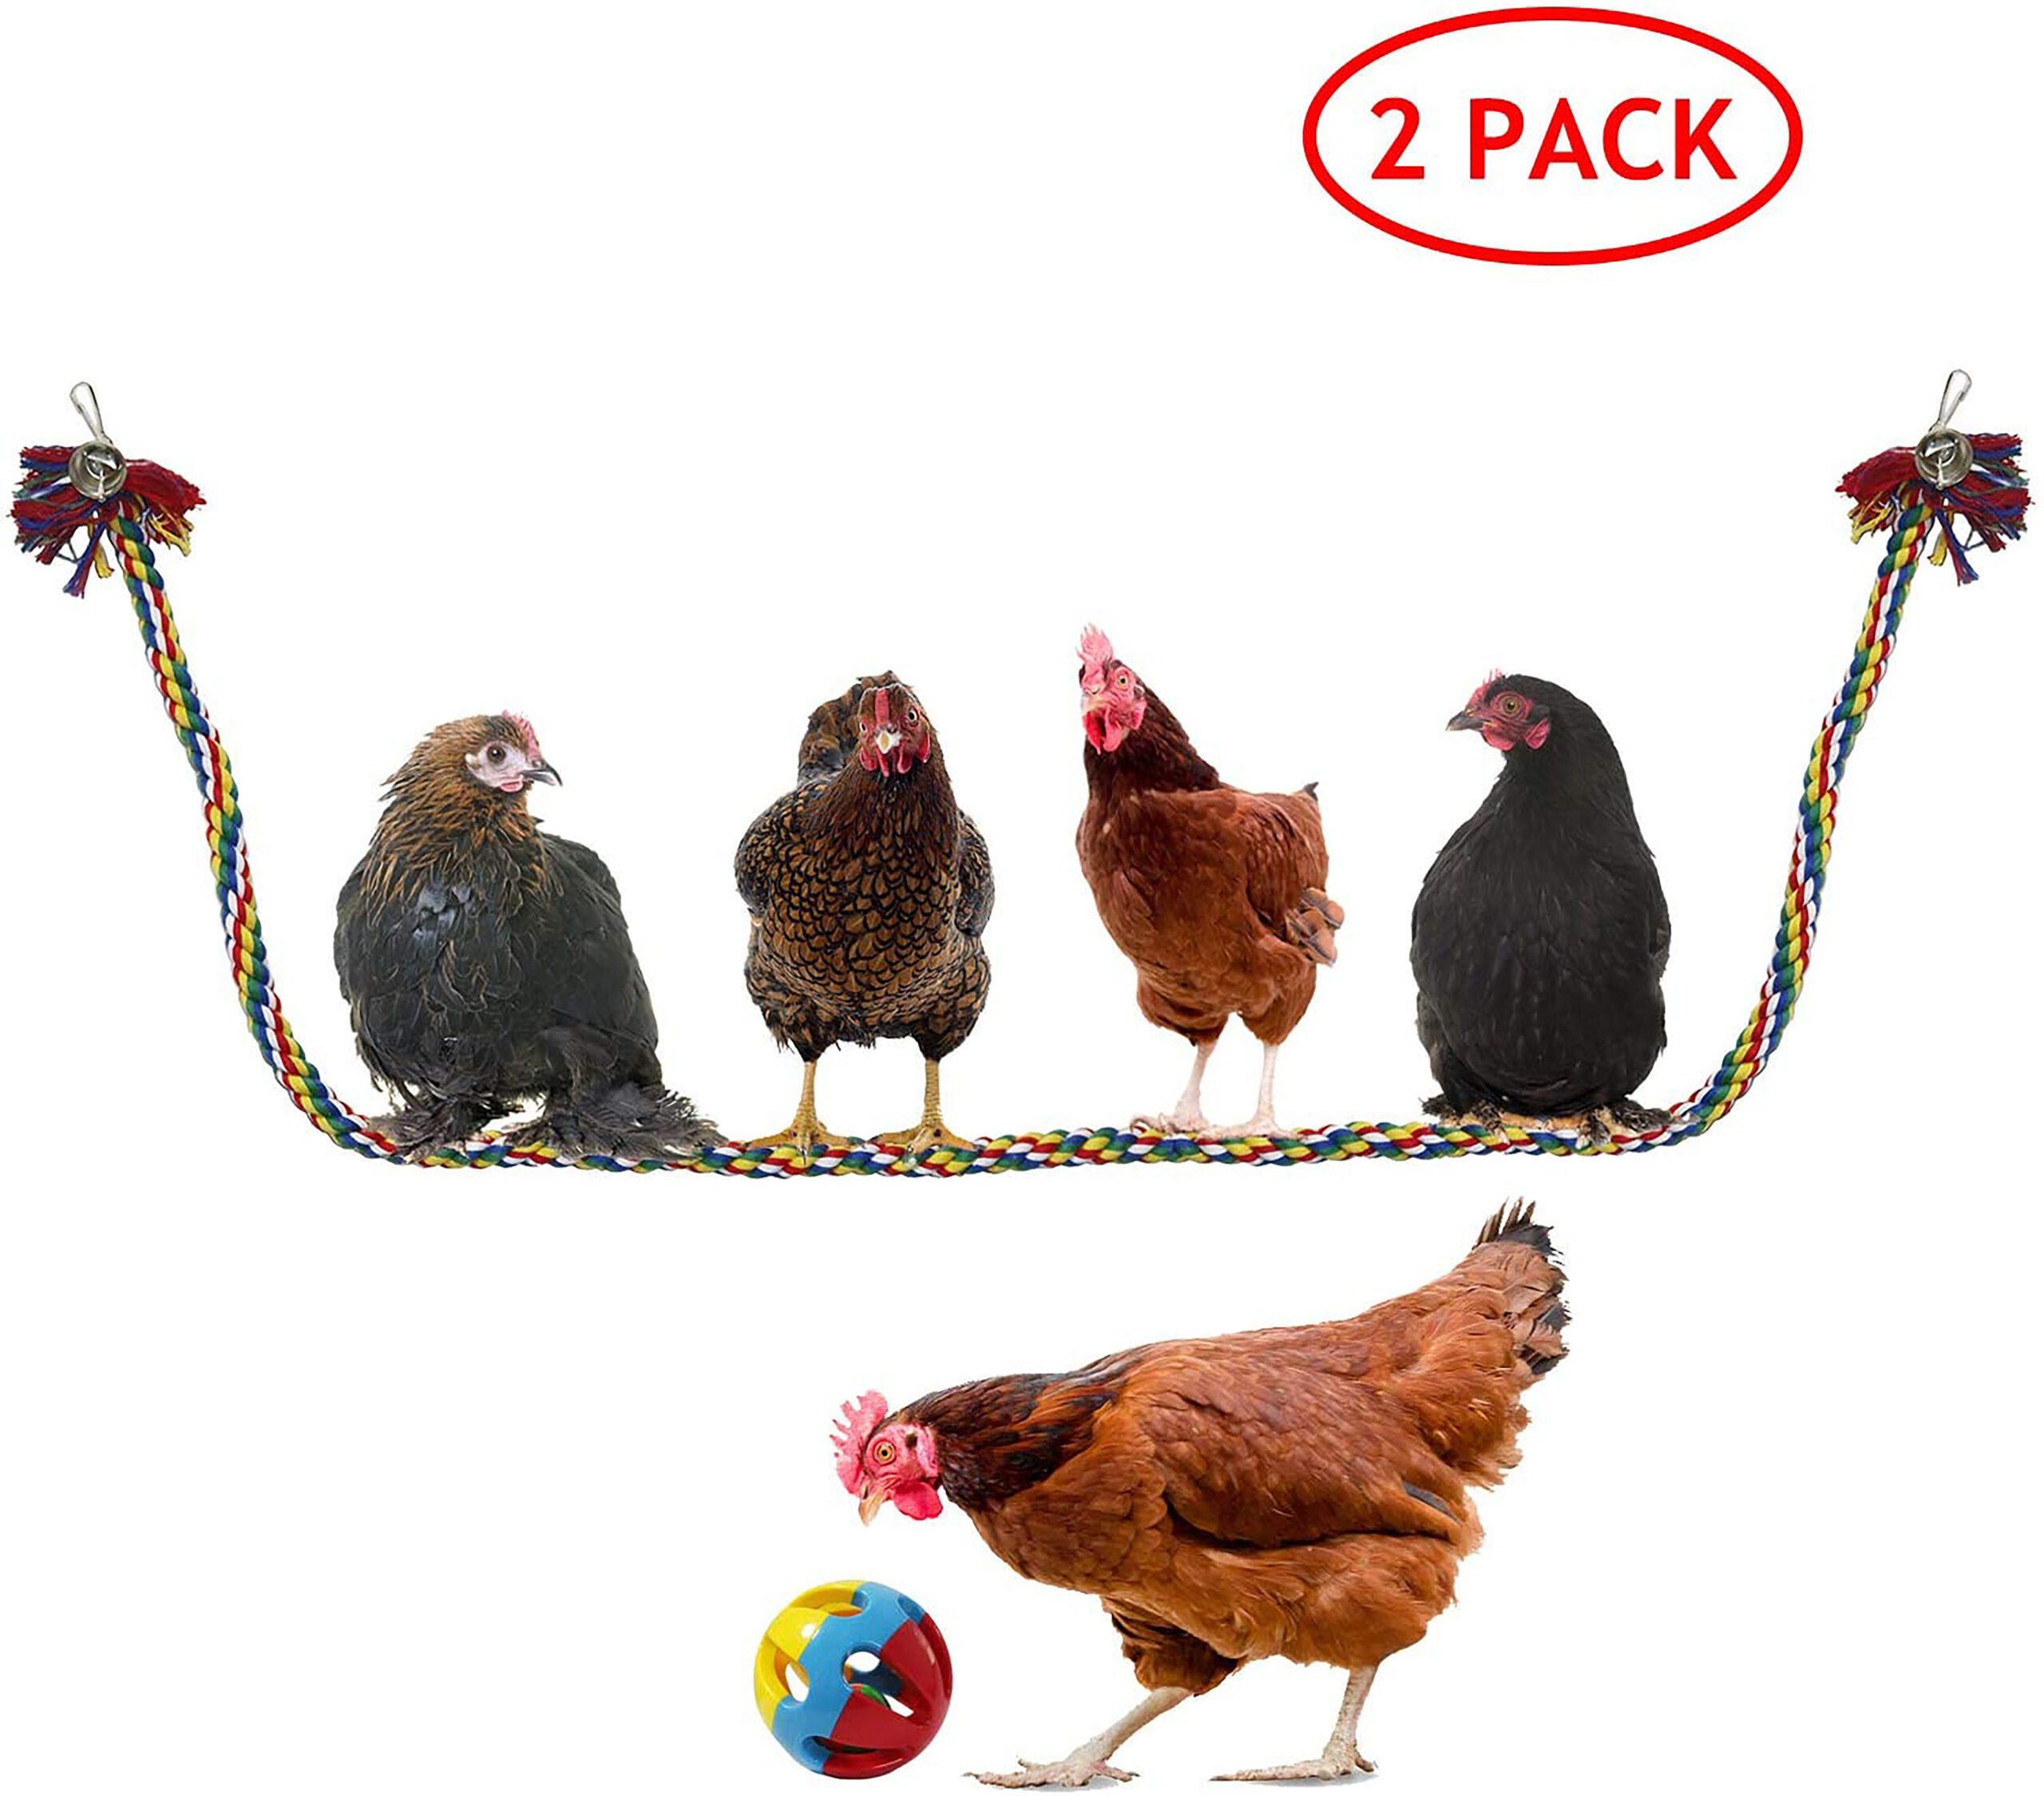 Chicken Hanging Swing Toy Chicken Swing Toy Wooden Colorful Chicken Chewing Toy Pet Training Hanging Toy MYYXGS Chicken Swing